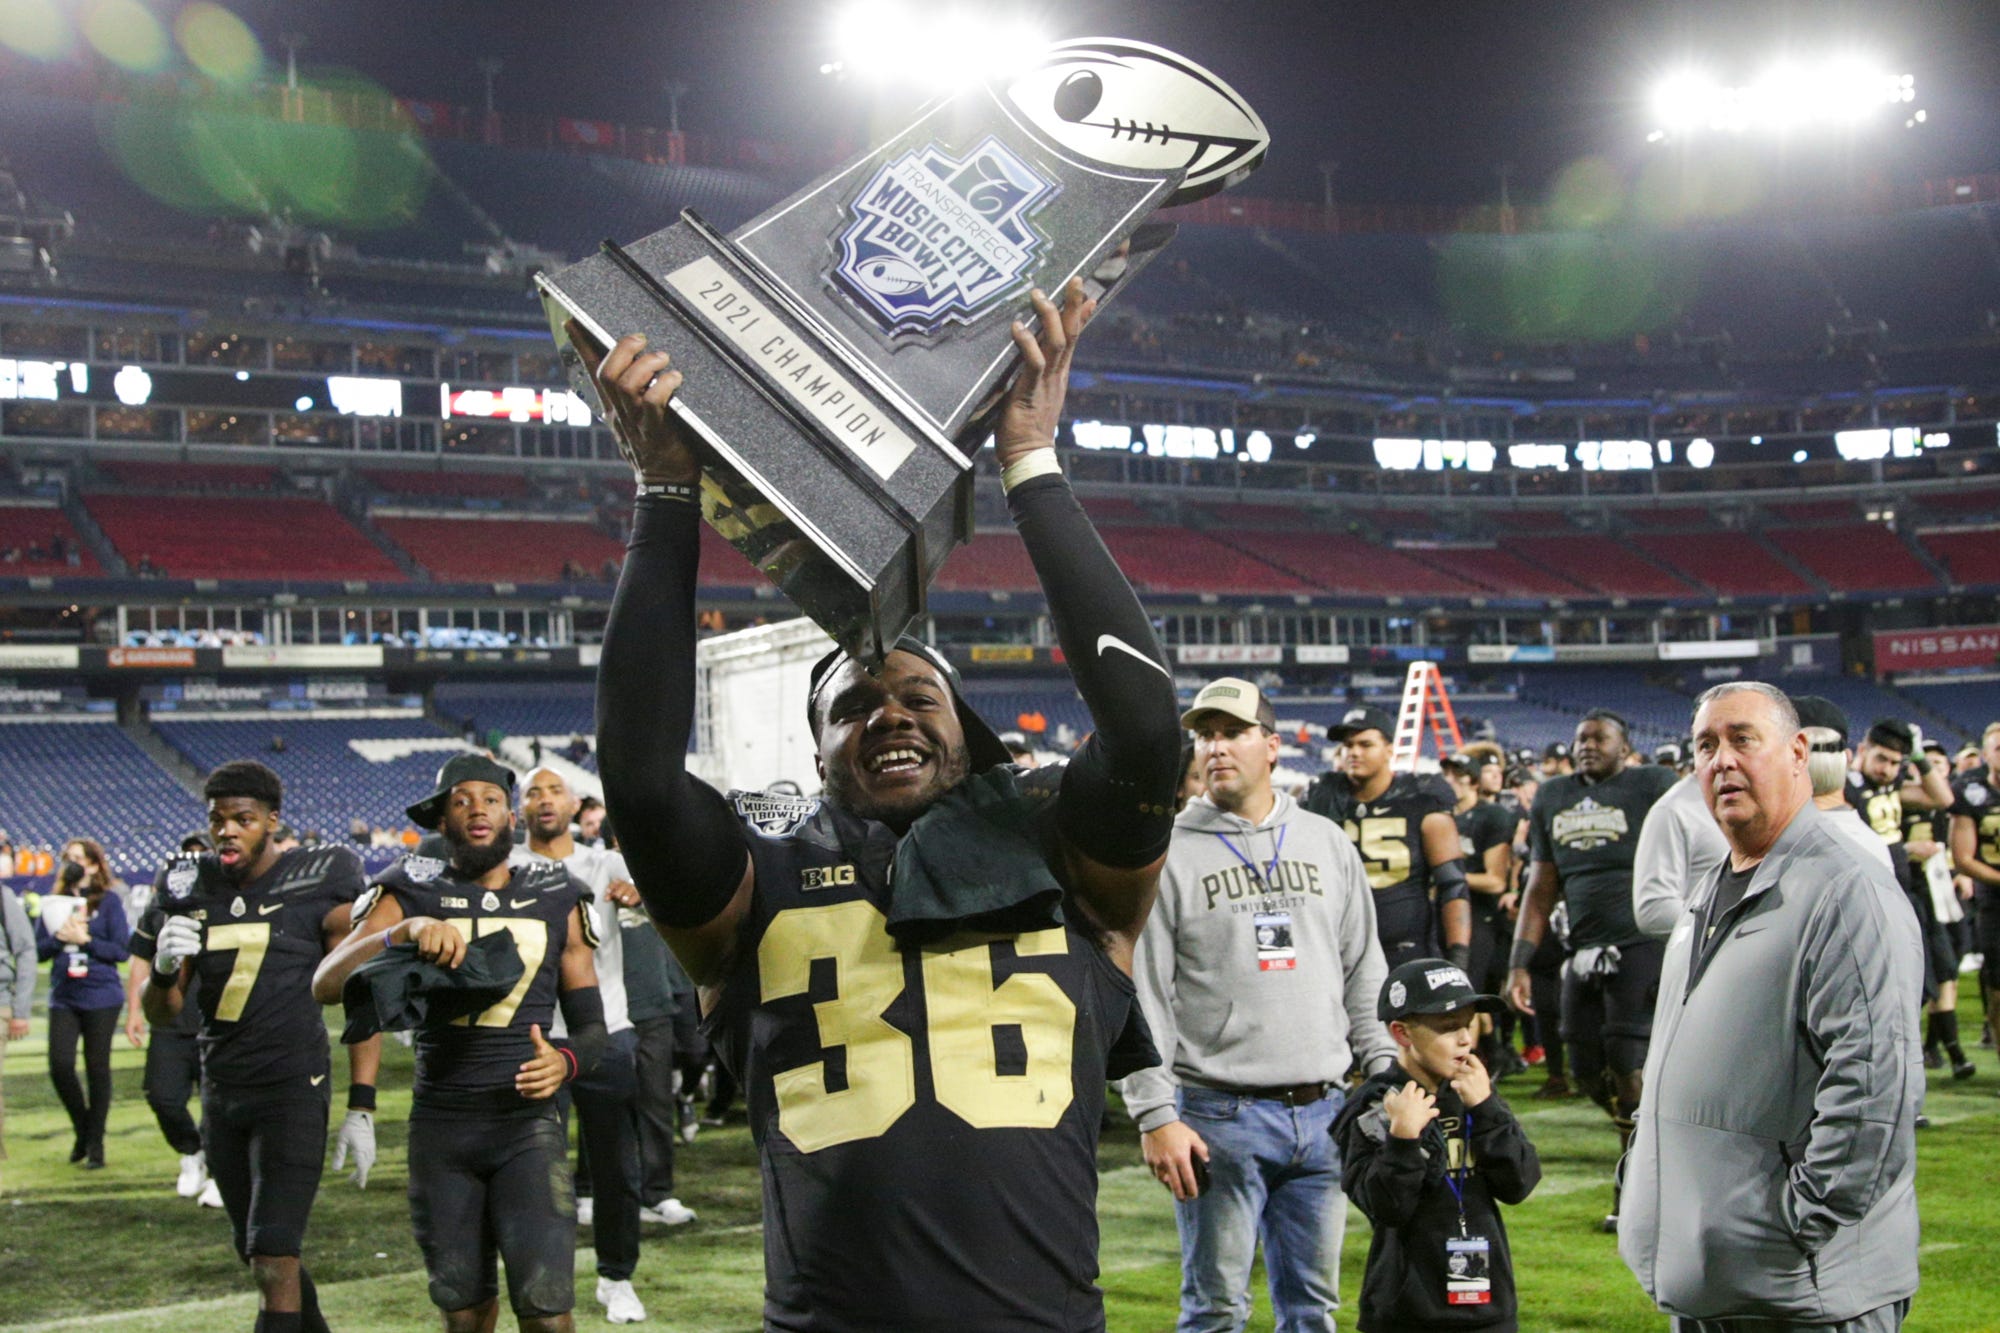 Purdue defeats Tennessee in overtime to win Music City Bowl, 48-45